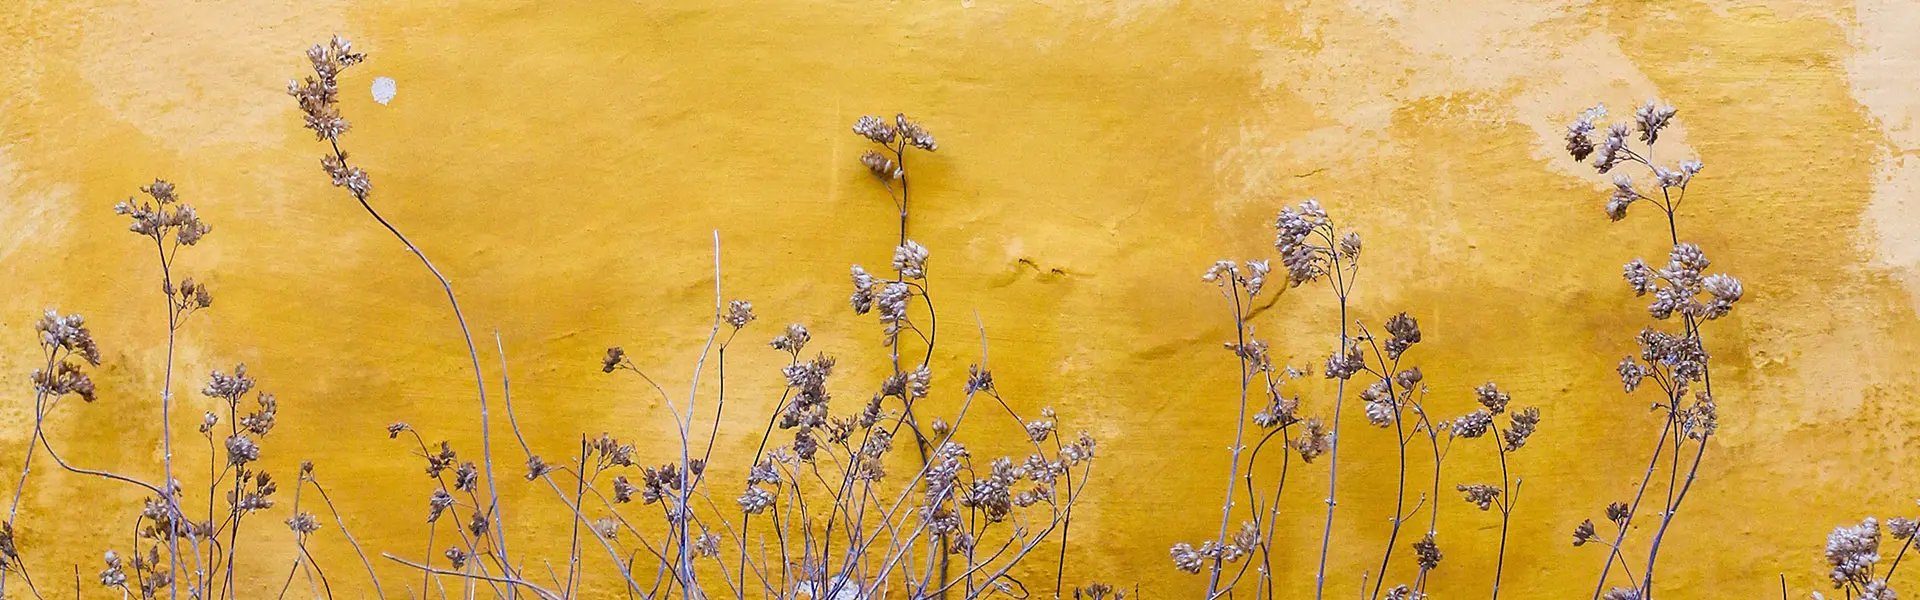 Yellow wall flowers